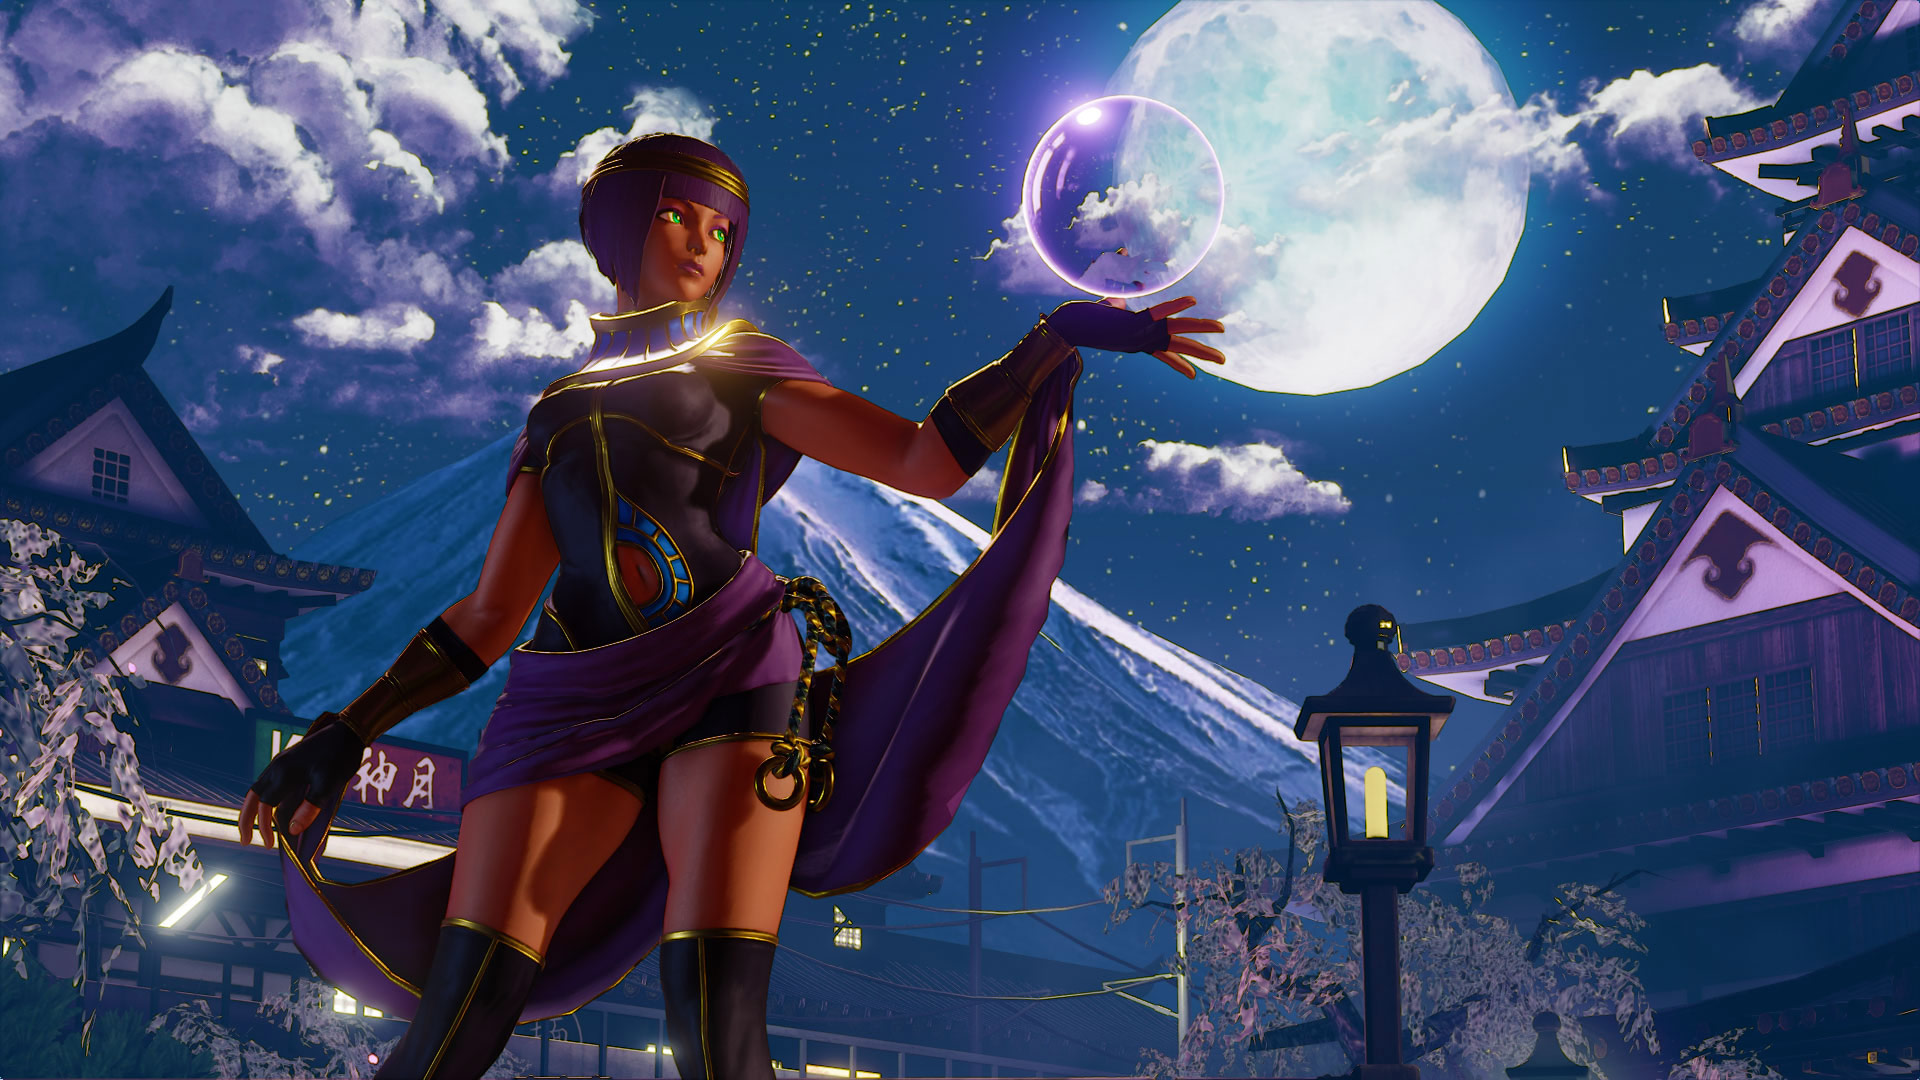 Street Fighter 5 - TFG Review / Art Gallery